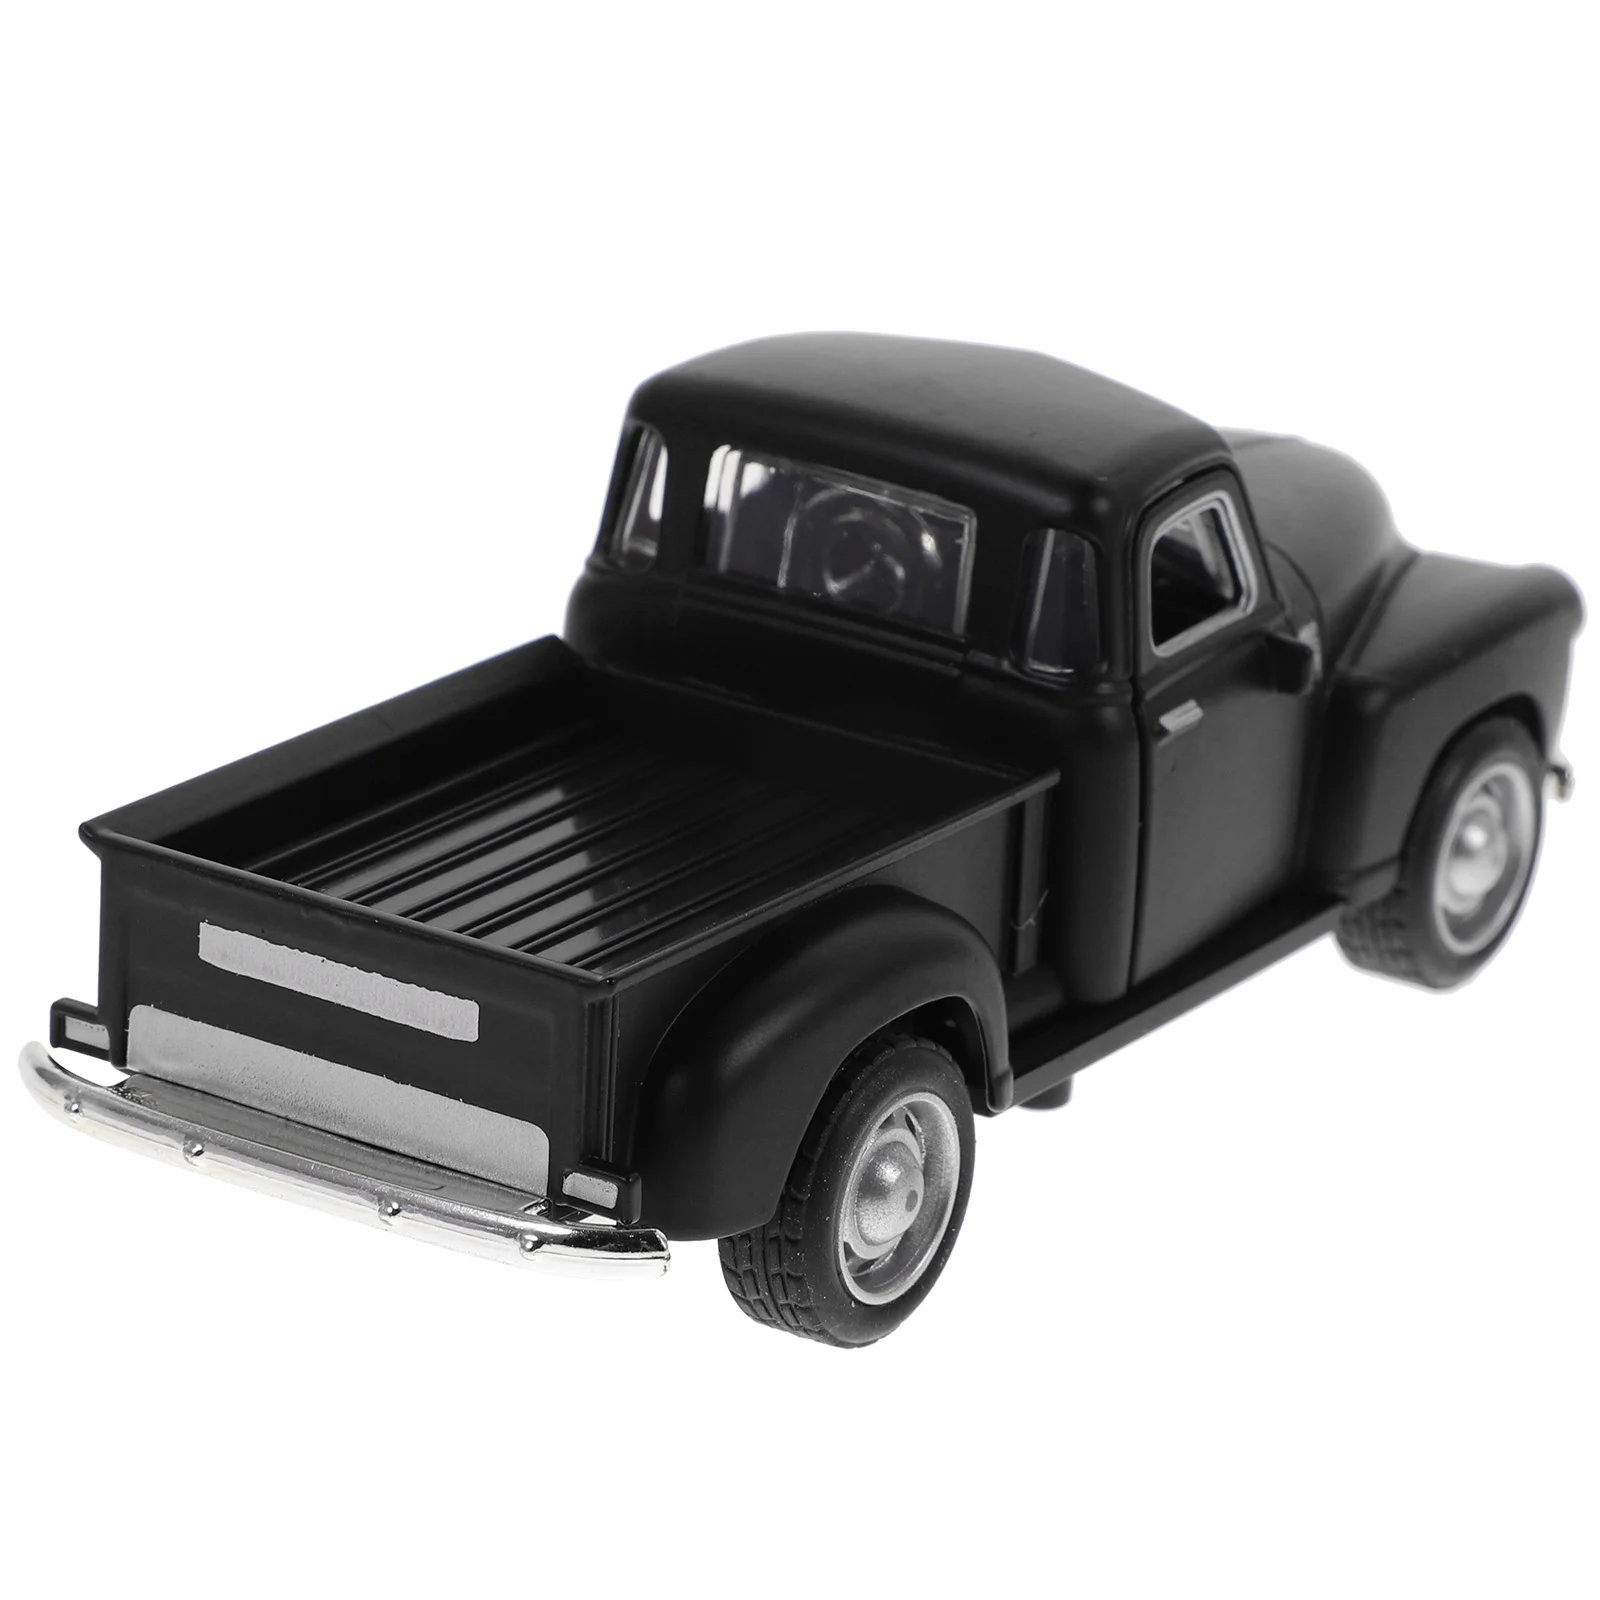 

Truck Car Model Toy Pickup Metal Vintage Cars Decor Diecast Christmas Alloy Retro Toys Figurine Classic Vehicle Up Old Pick Red